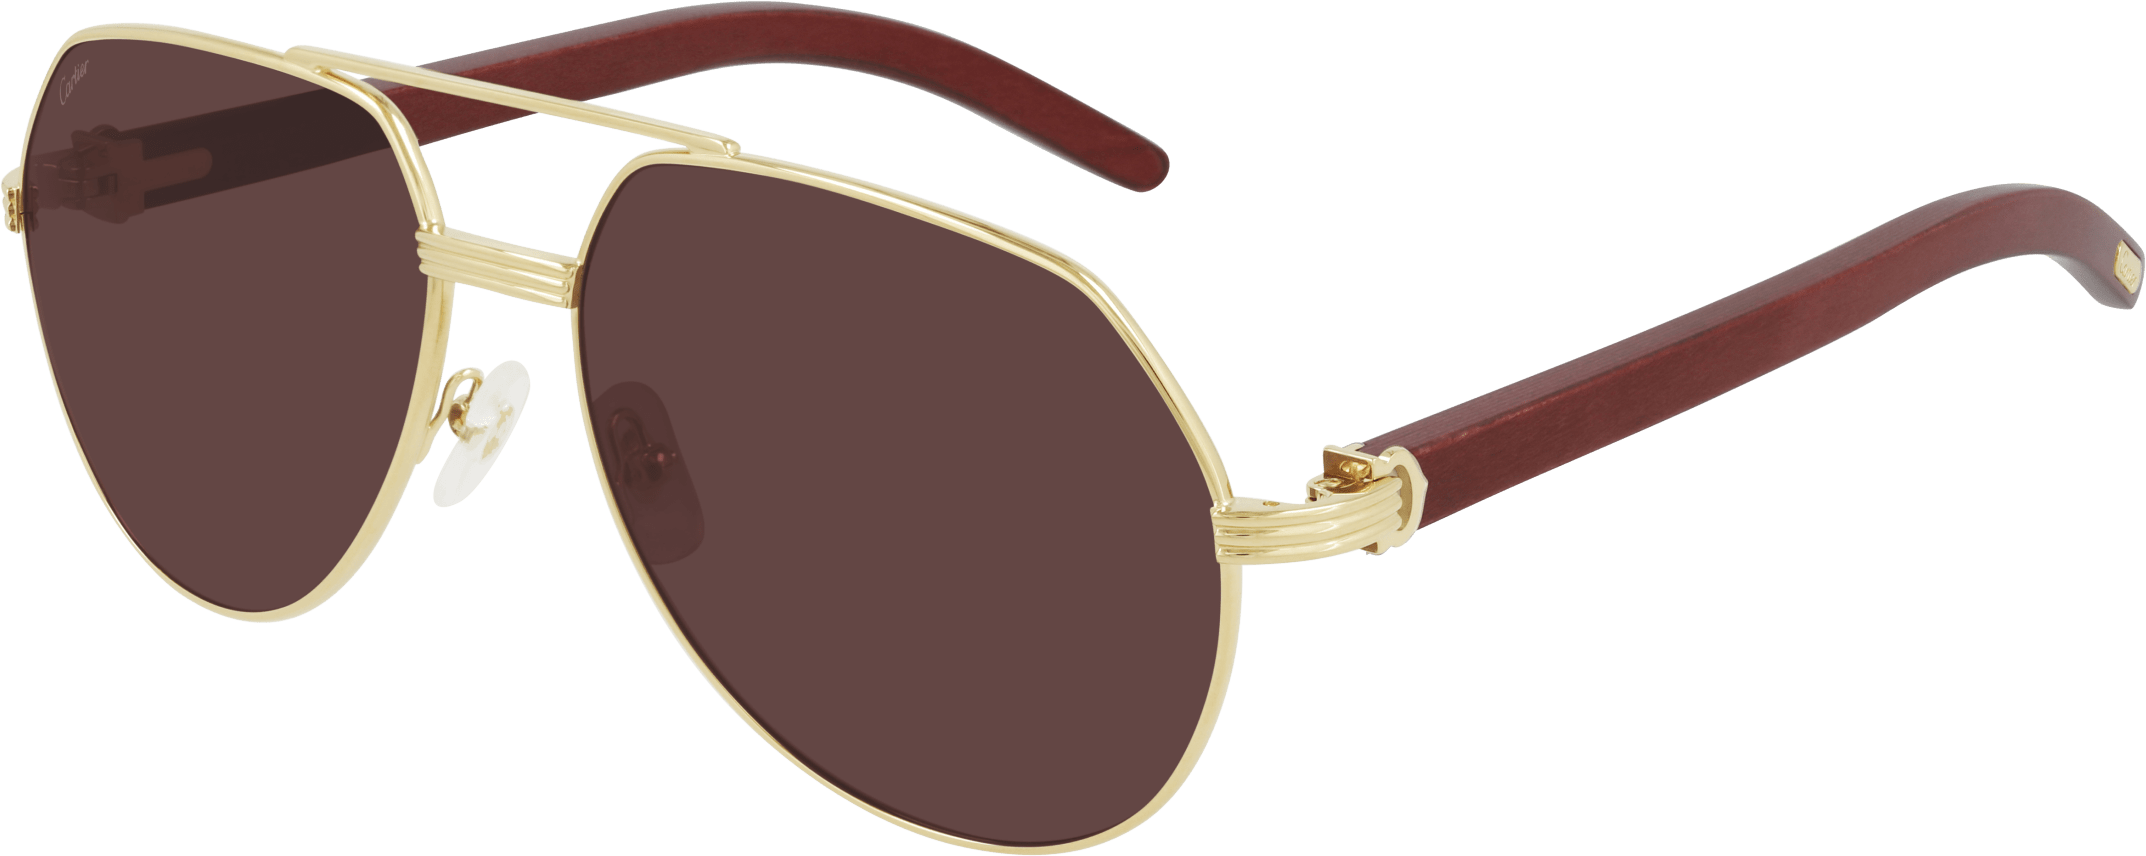 Color_CT0272S-004 - GOLD - VIOLET - AR (ANTI REFLECTIVE) - POLARIZED